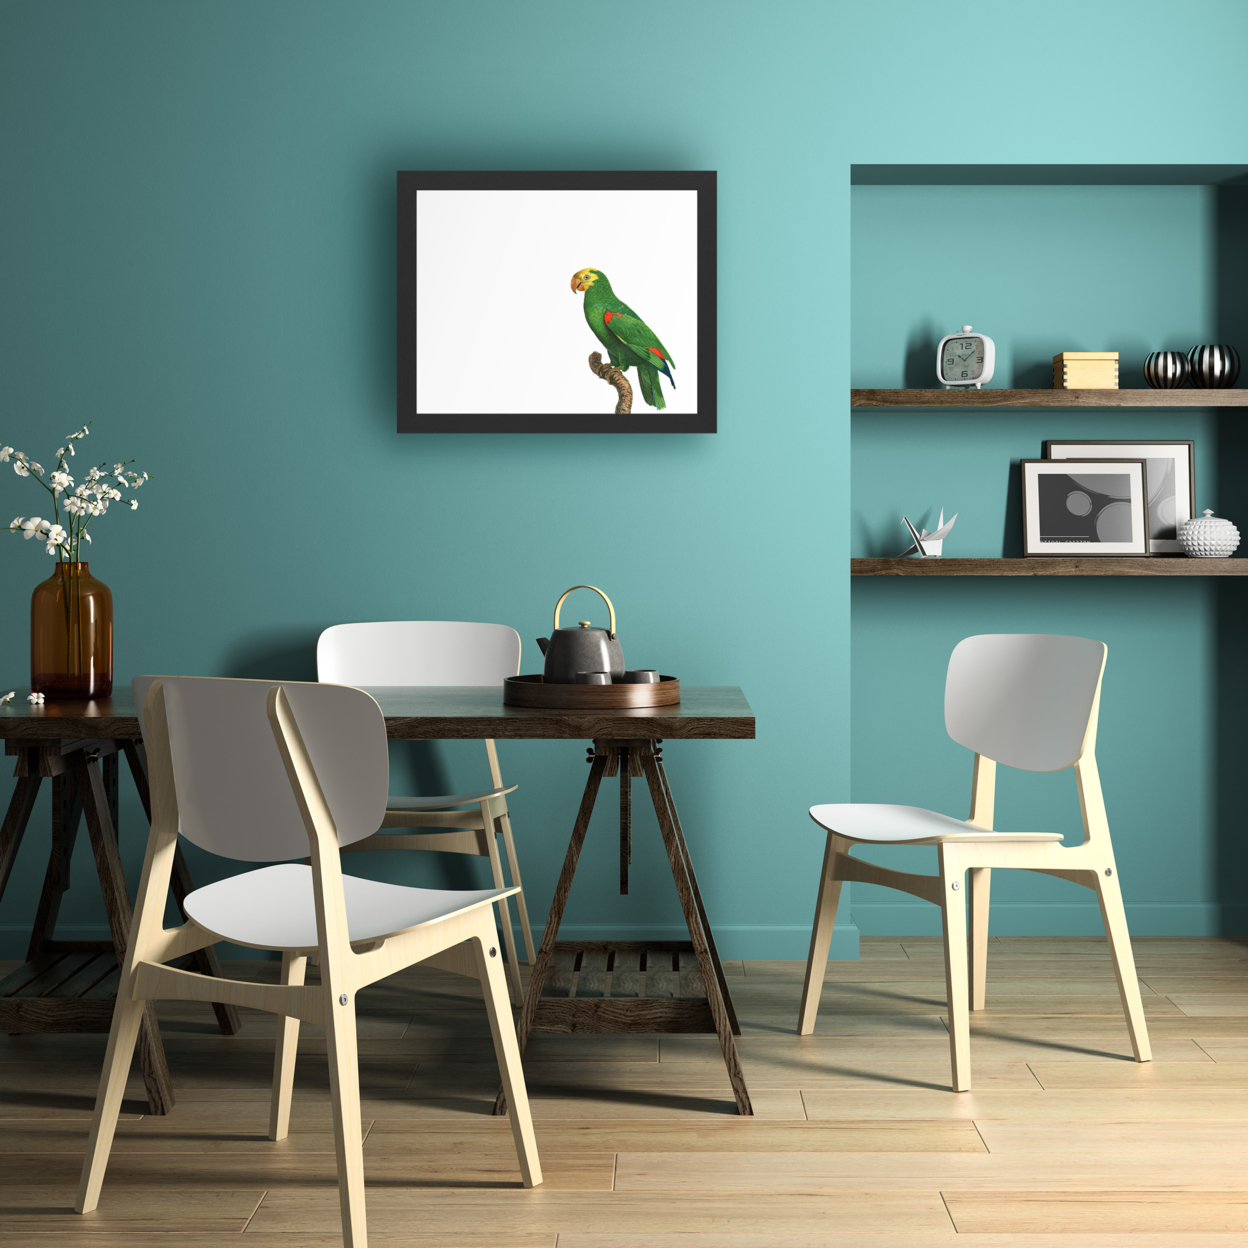 Dry Erase 16 X 20 Marker Board With Printed Artwork - Barraband Parrot Of The Tropics Iii White Board - Ready To Hang